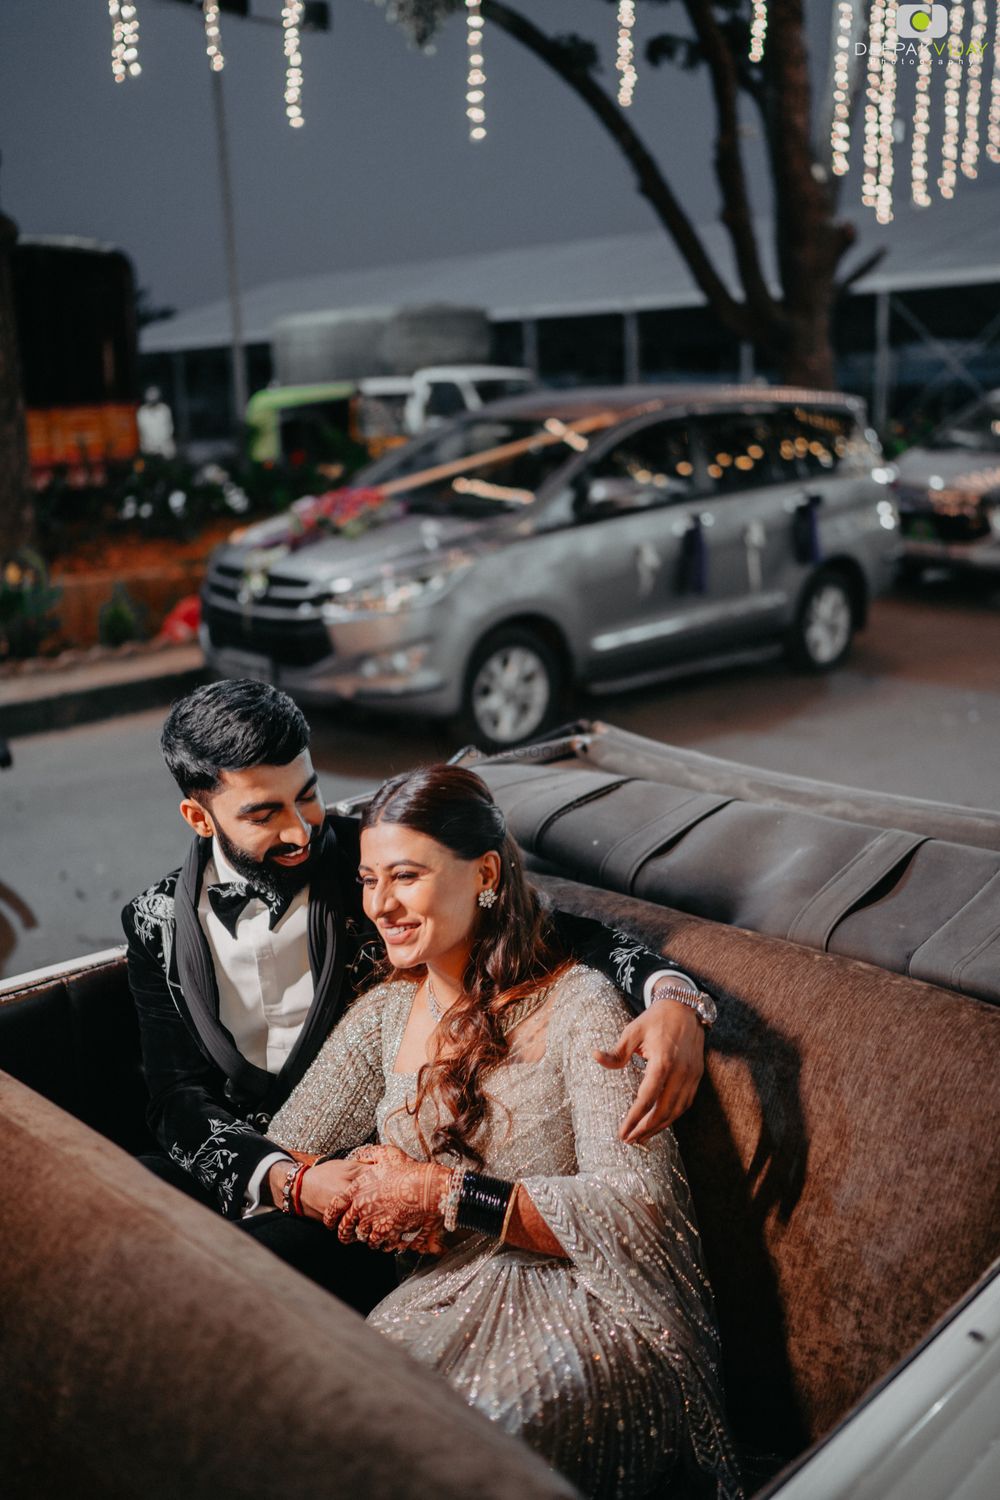 Photo of Bright & happy couple shot in vintage car